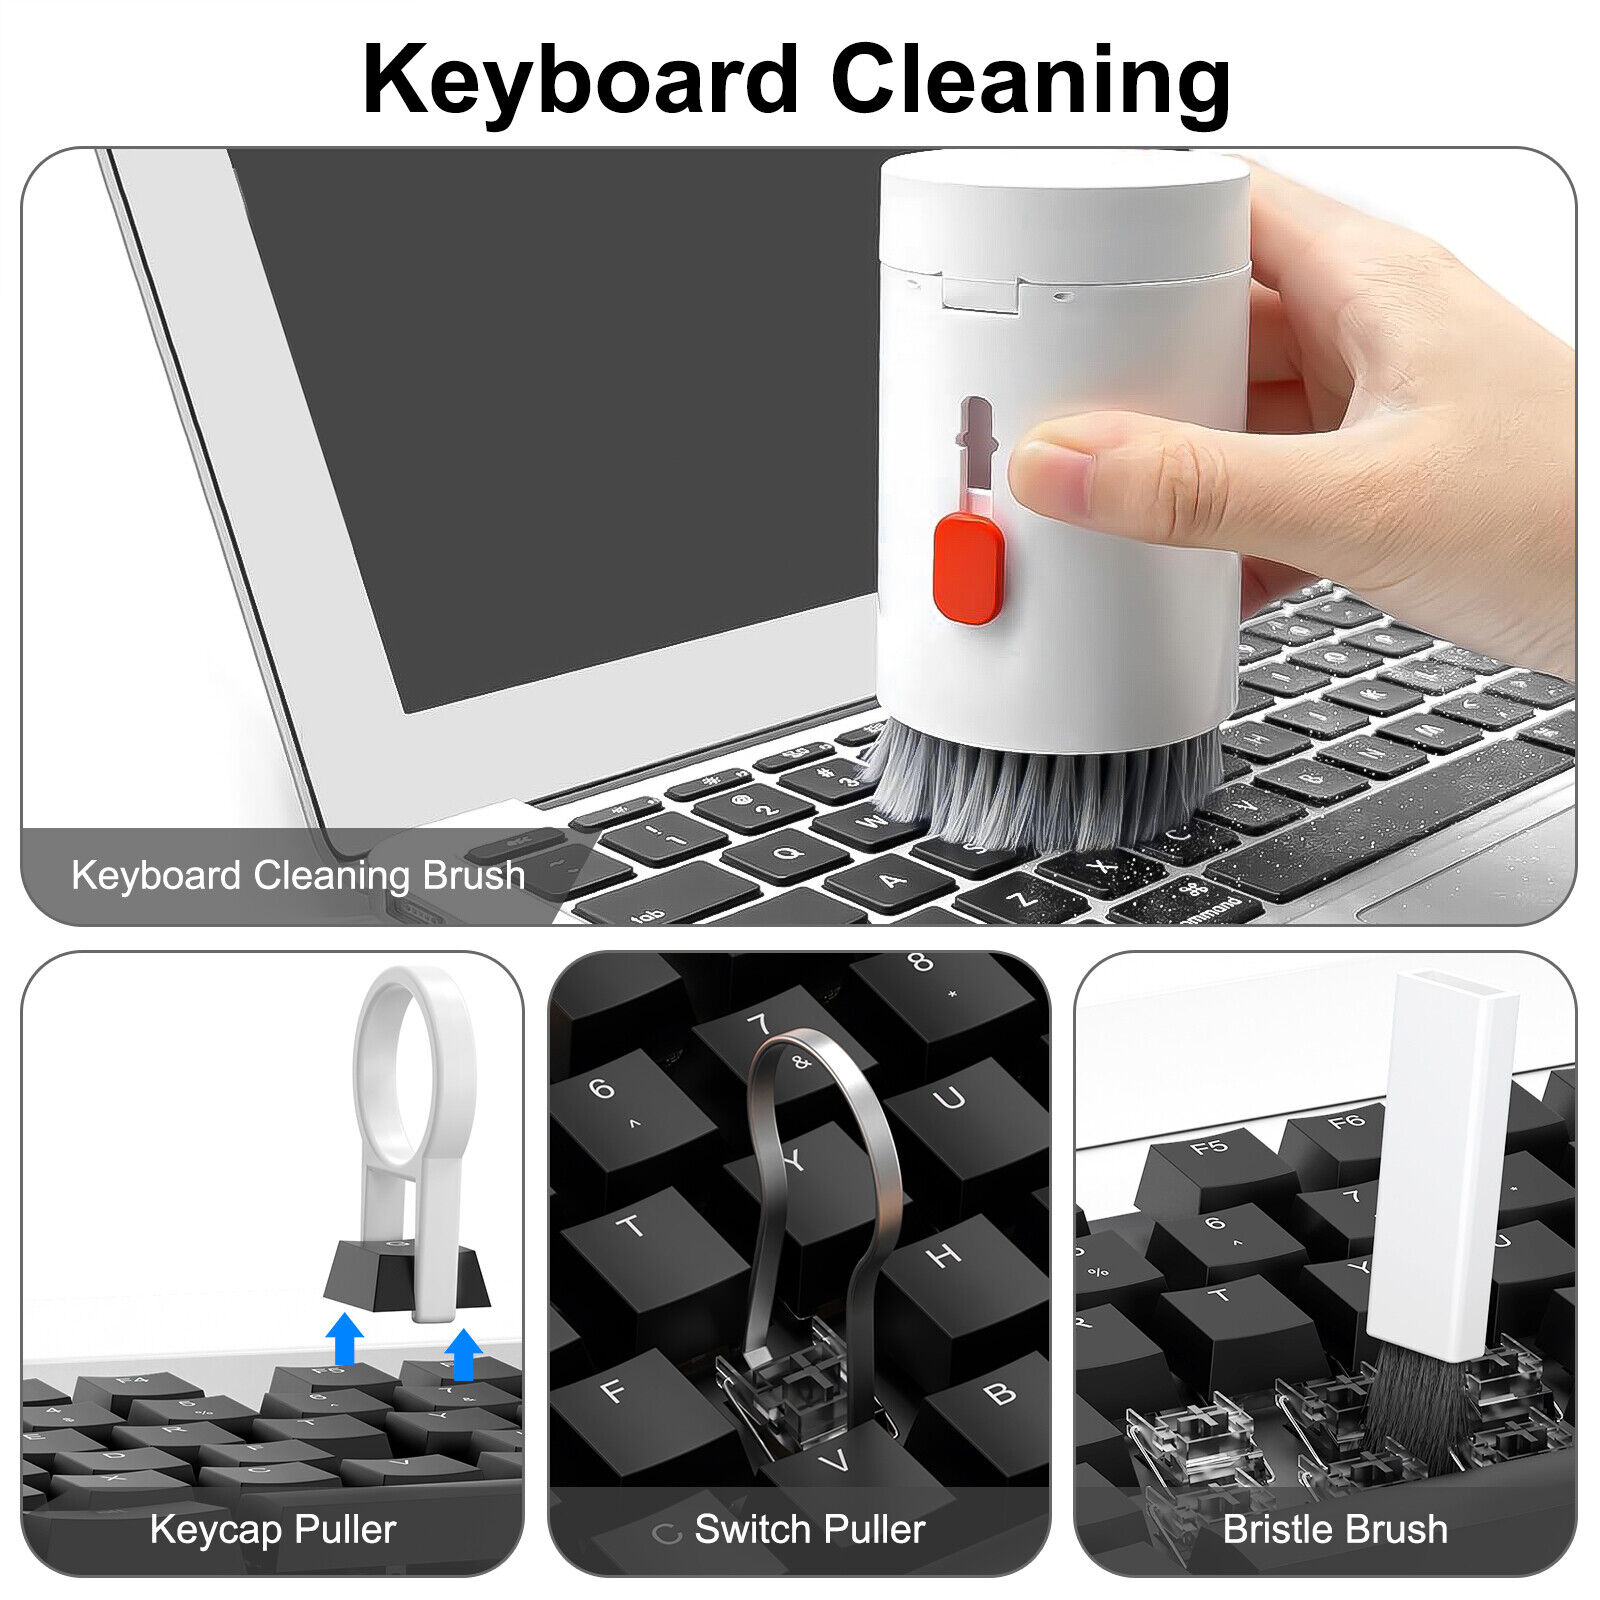 Laptop Keyboard Cleaner Kit 20-in-1 Electronic Device Clean Tool Set for Camera